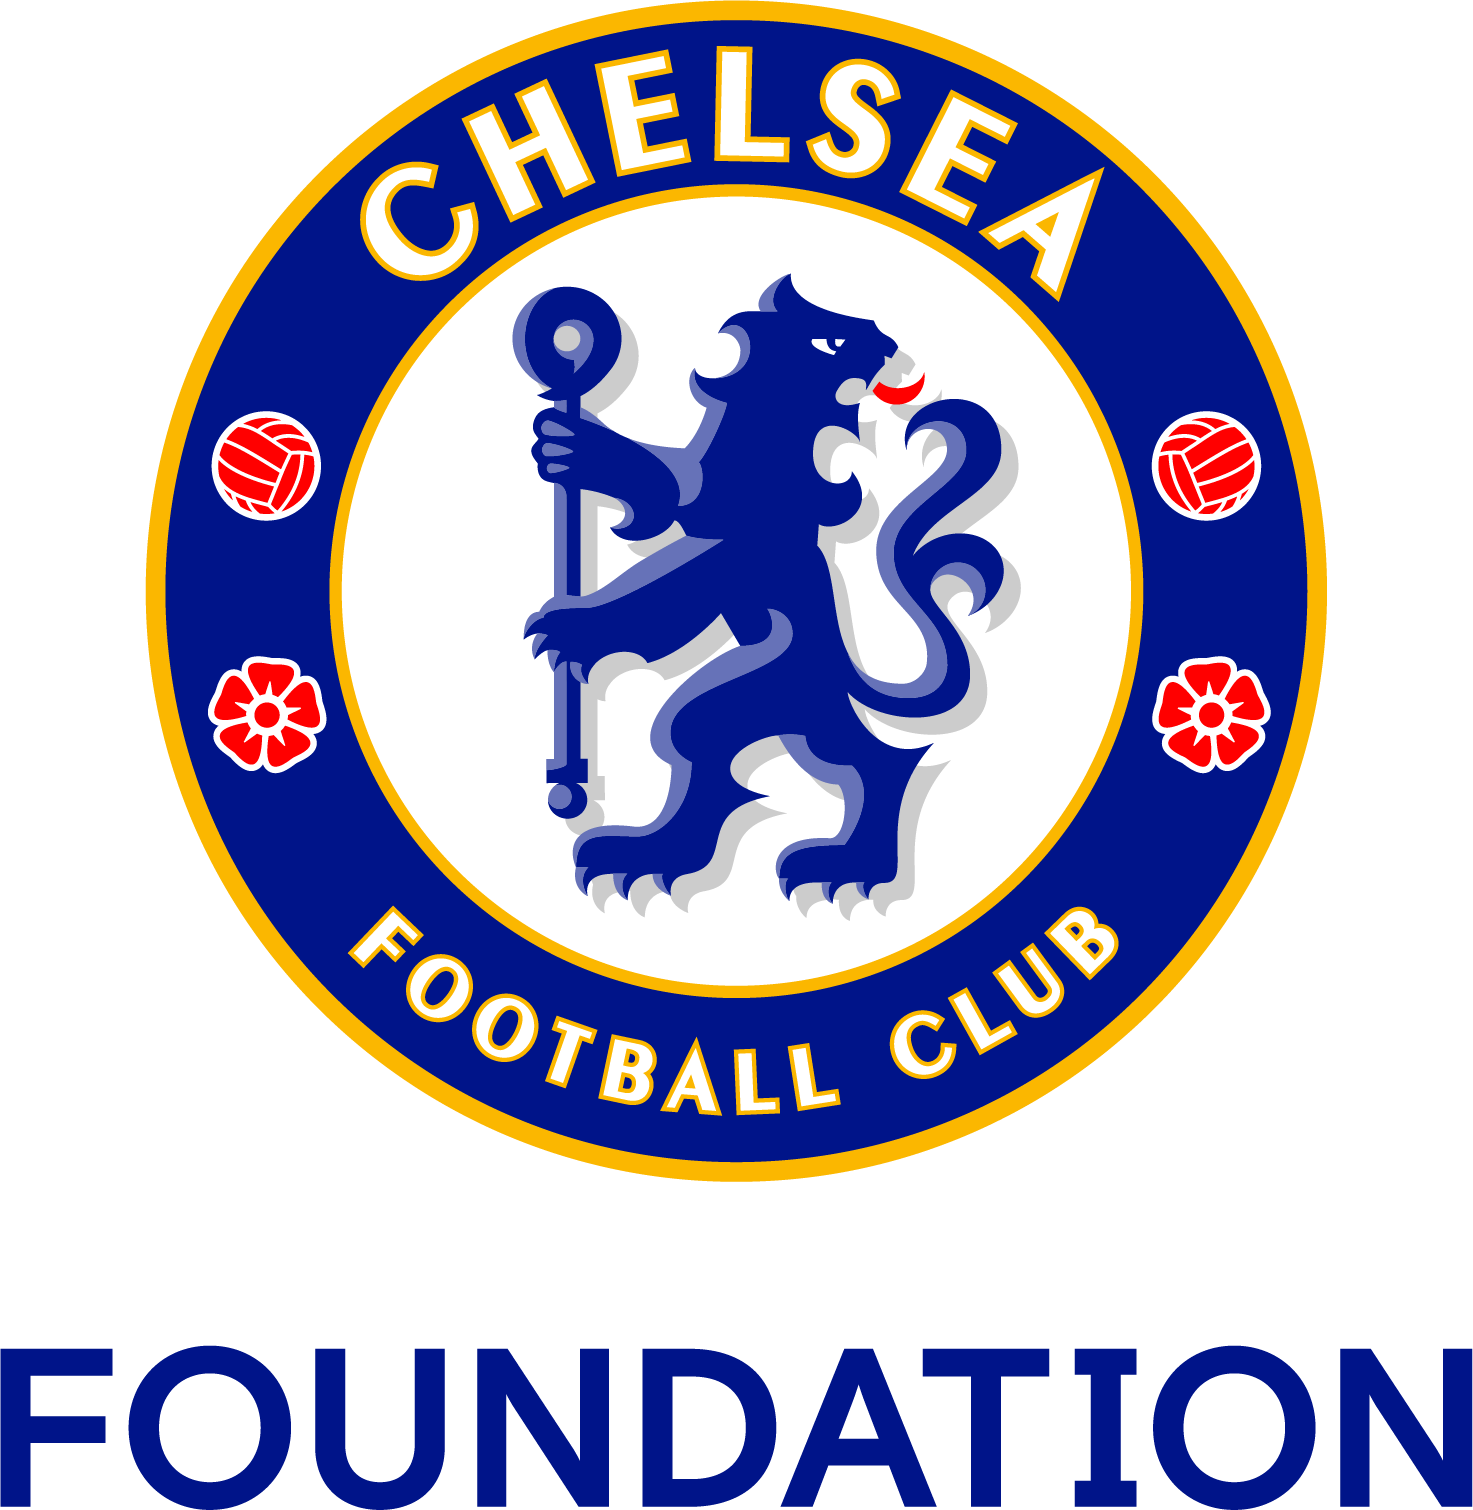 Stanmore College works with Chelsea Foundation